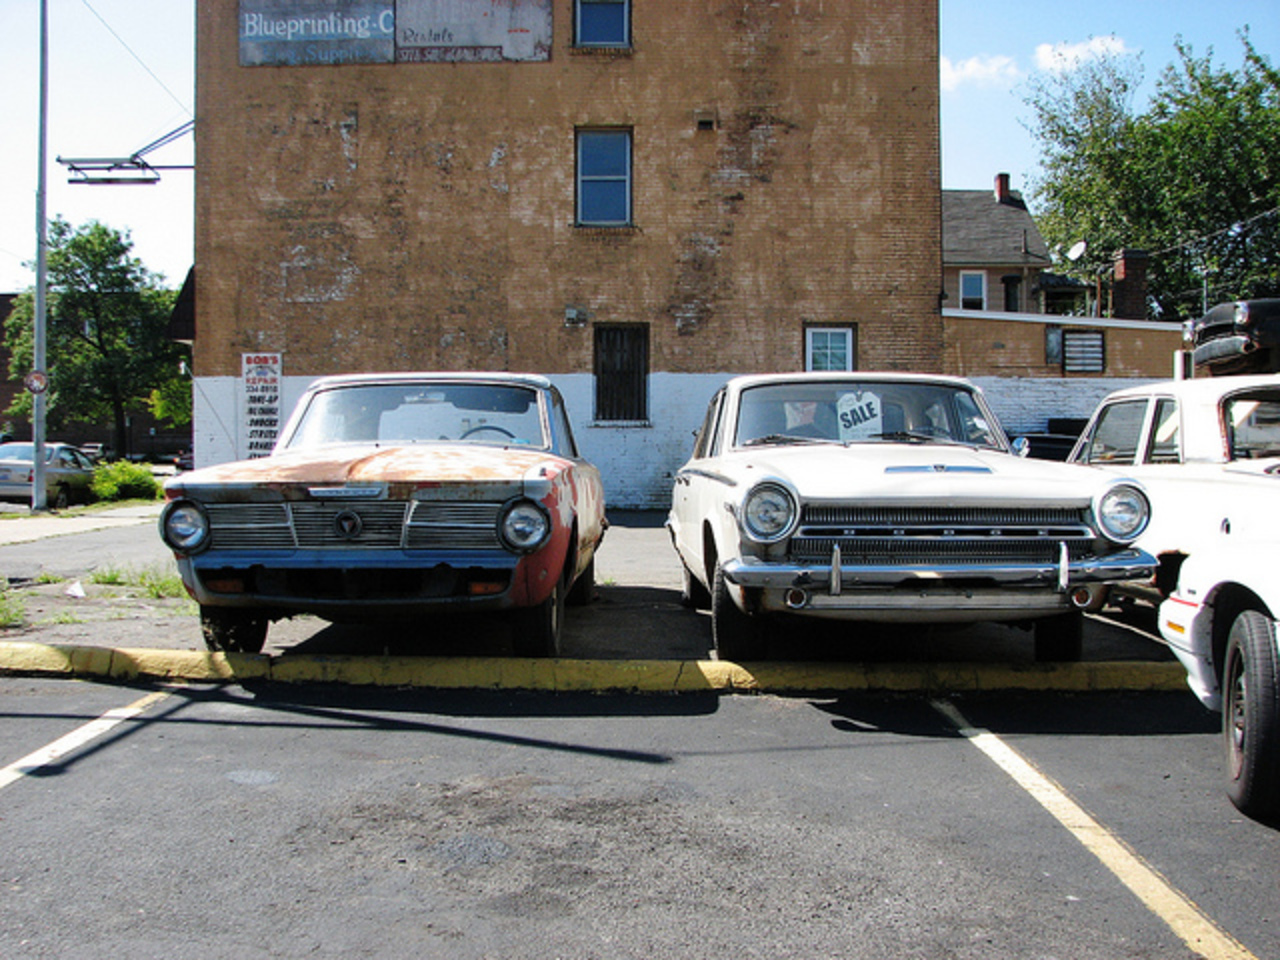 THE '65 PLYMOUTH AND '64 DODGE | Flickr - Photo Sharing!